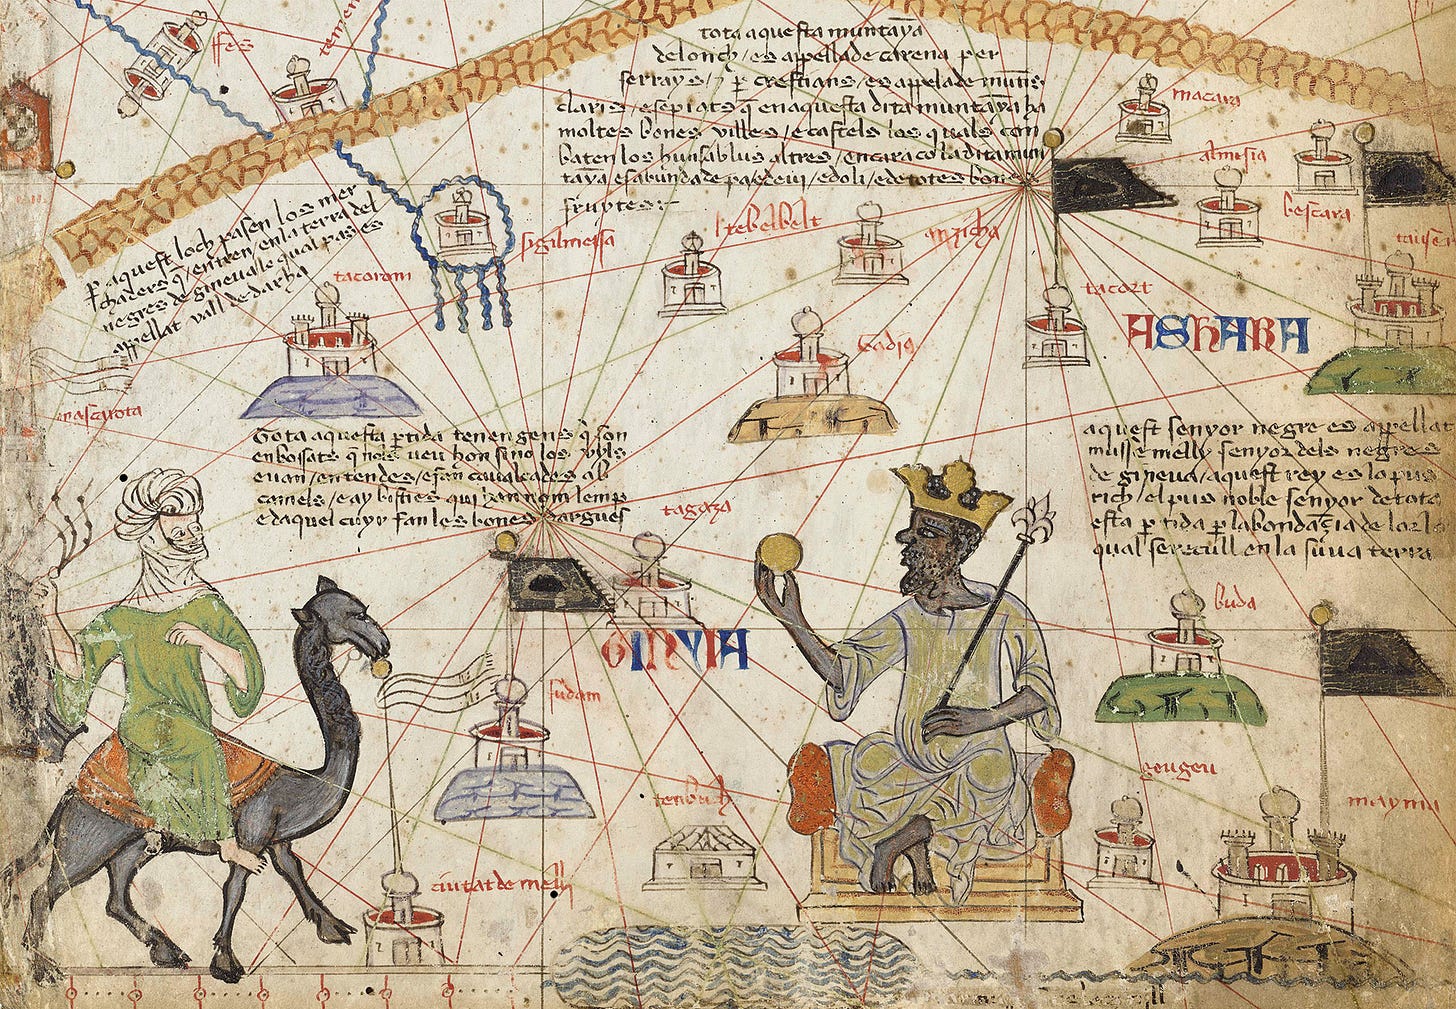 Mansa Musa and the royal pilgrimage tradition of west Africa 11th18th